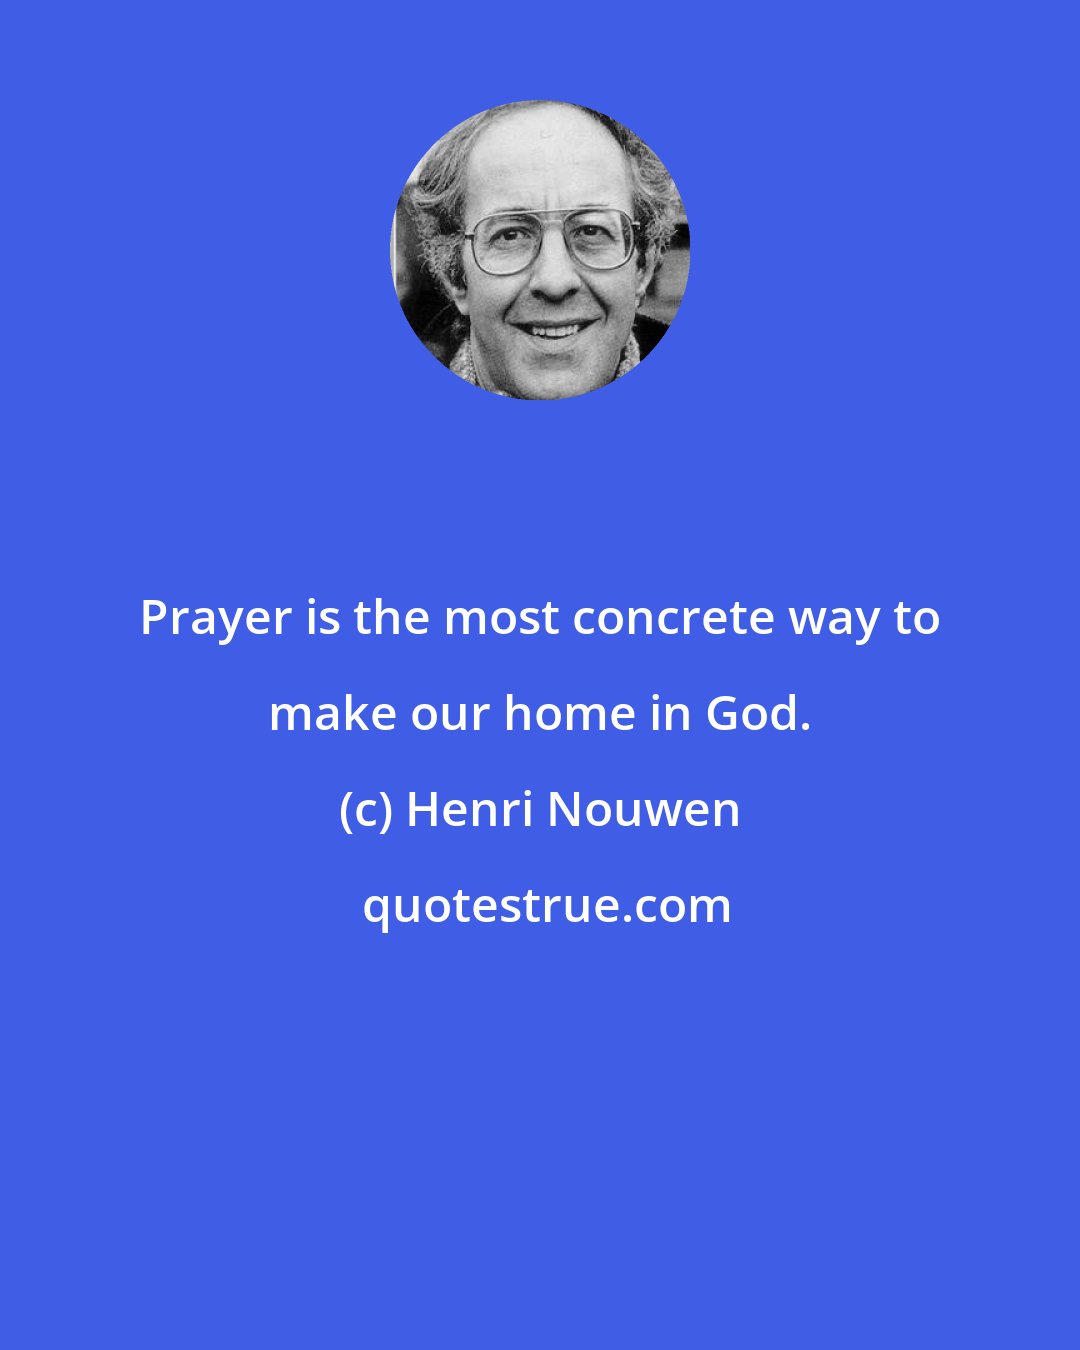 Henri Nouwen: Prayer is the most concrete way to make our home in God.